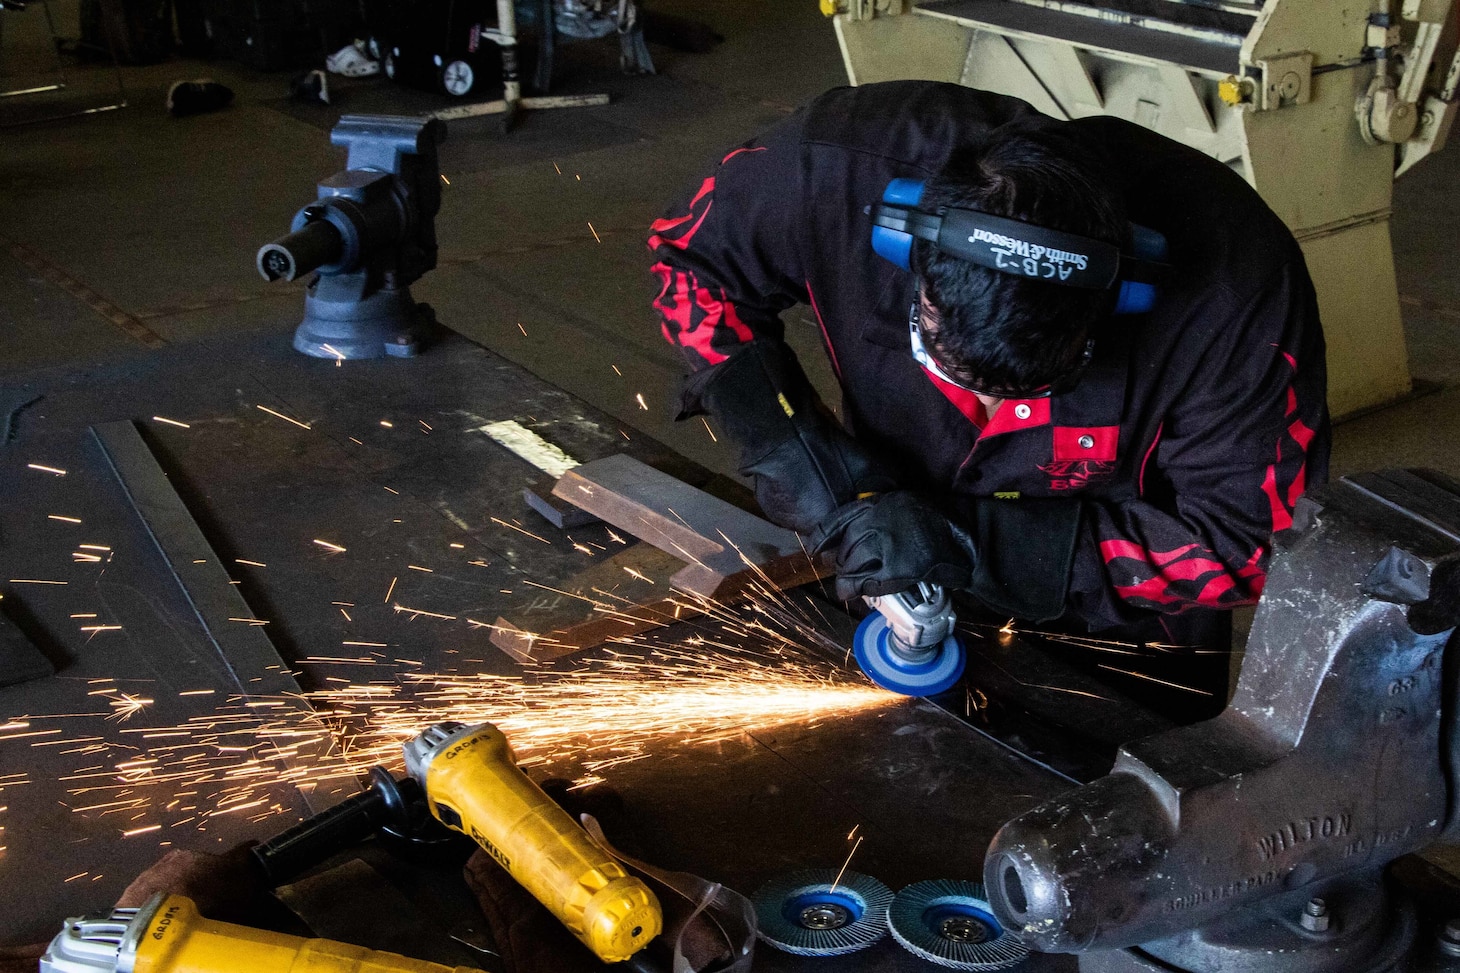 Steelworker Constructionman Alexander Rose grinds out a metal strip in preparation for welding on Naval Amphibious Base Coronado, Feb. 2, 2021.